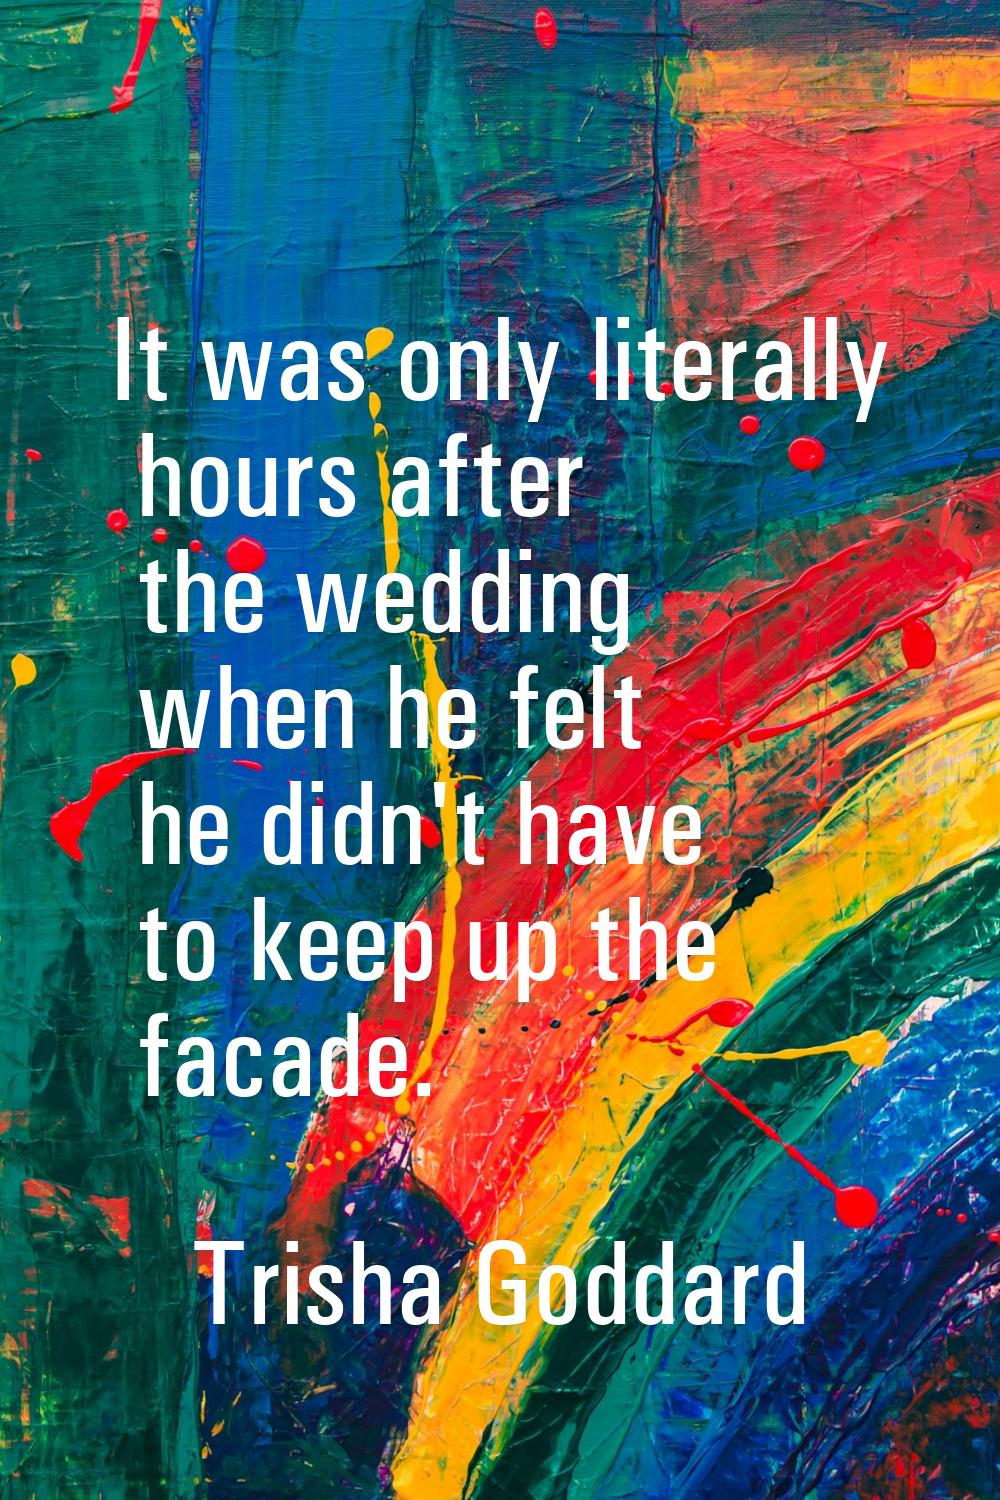 It was only literally hours after the wedding when he felt he didn't have to keep up the facade.